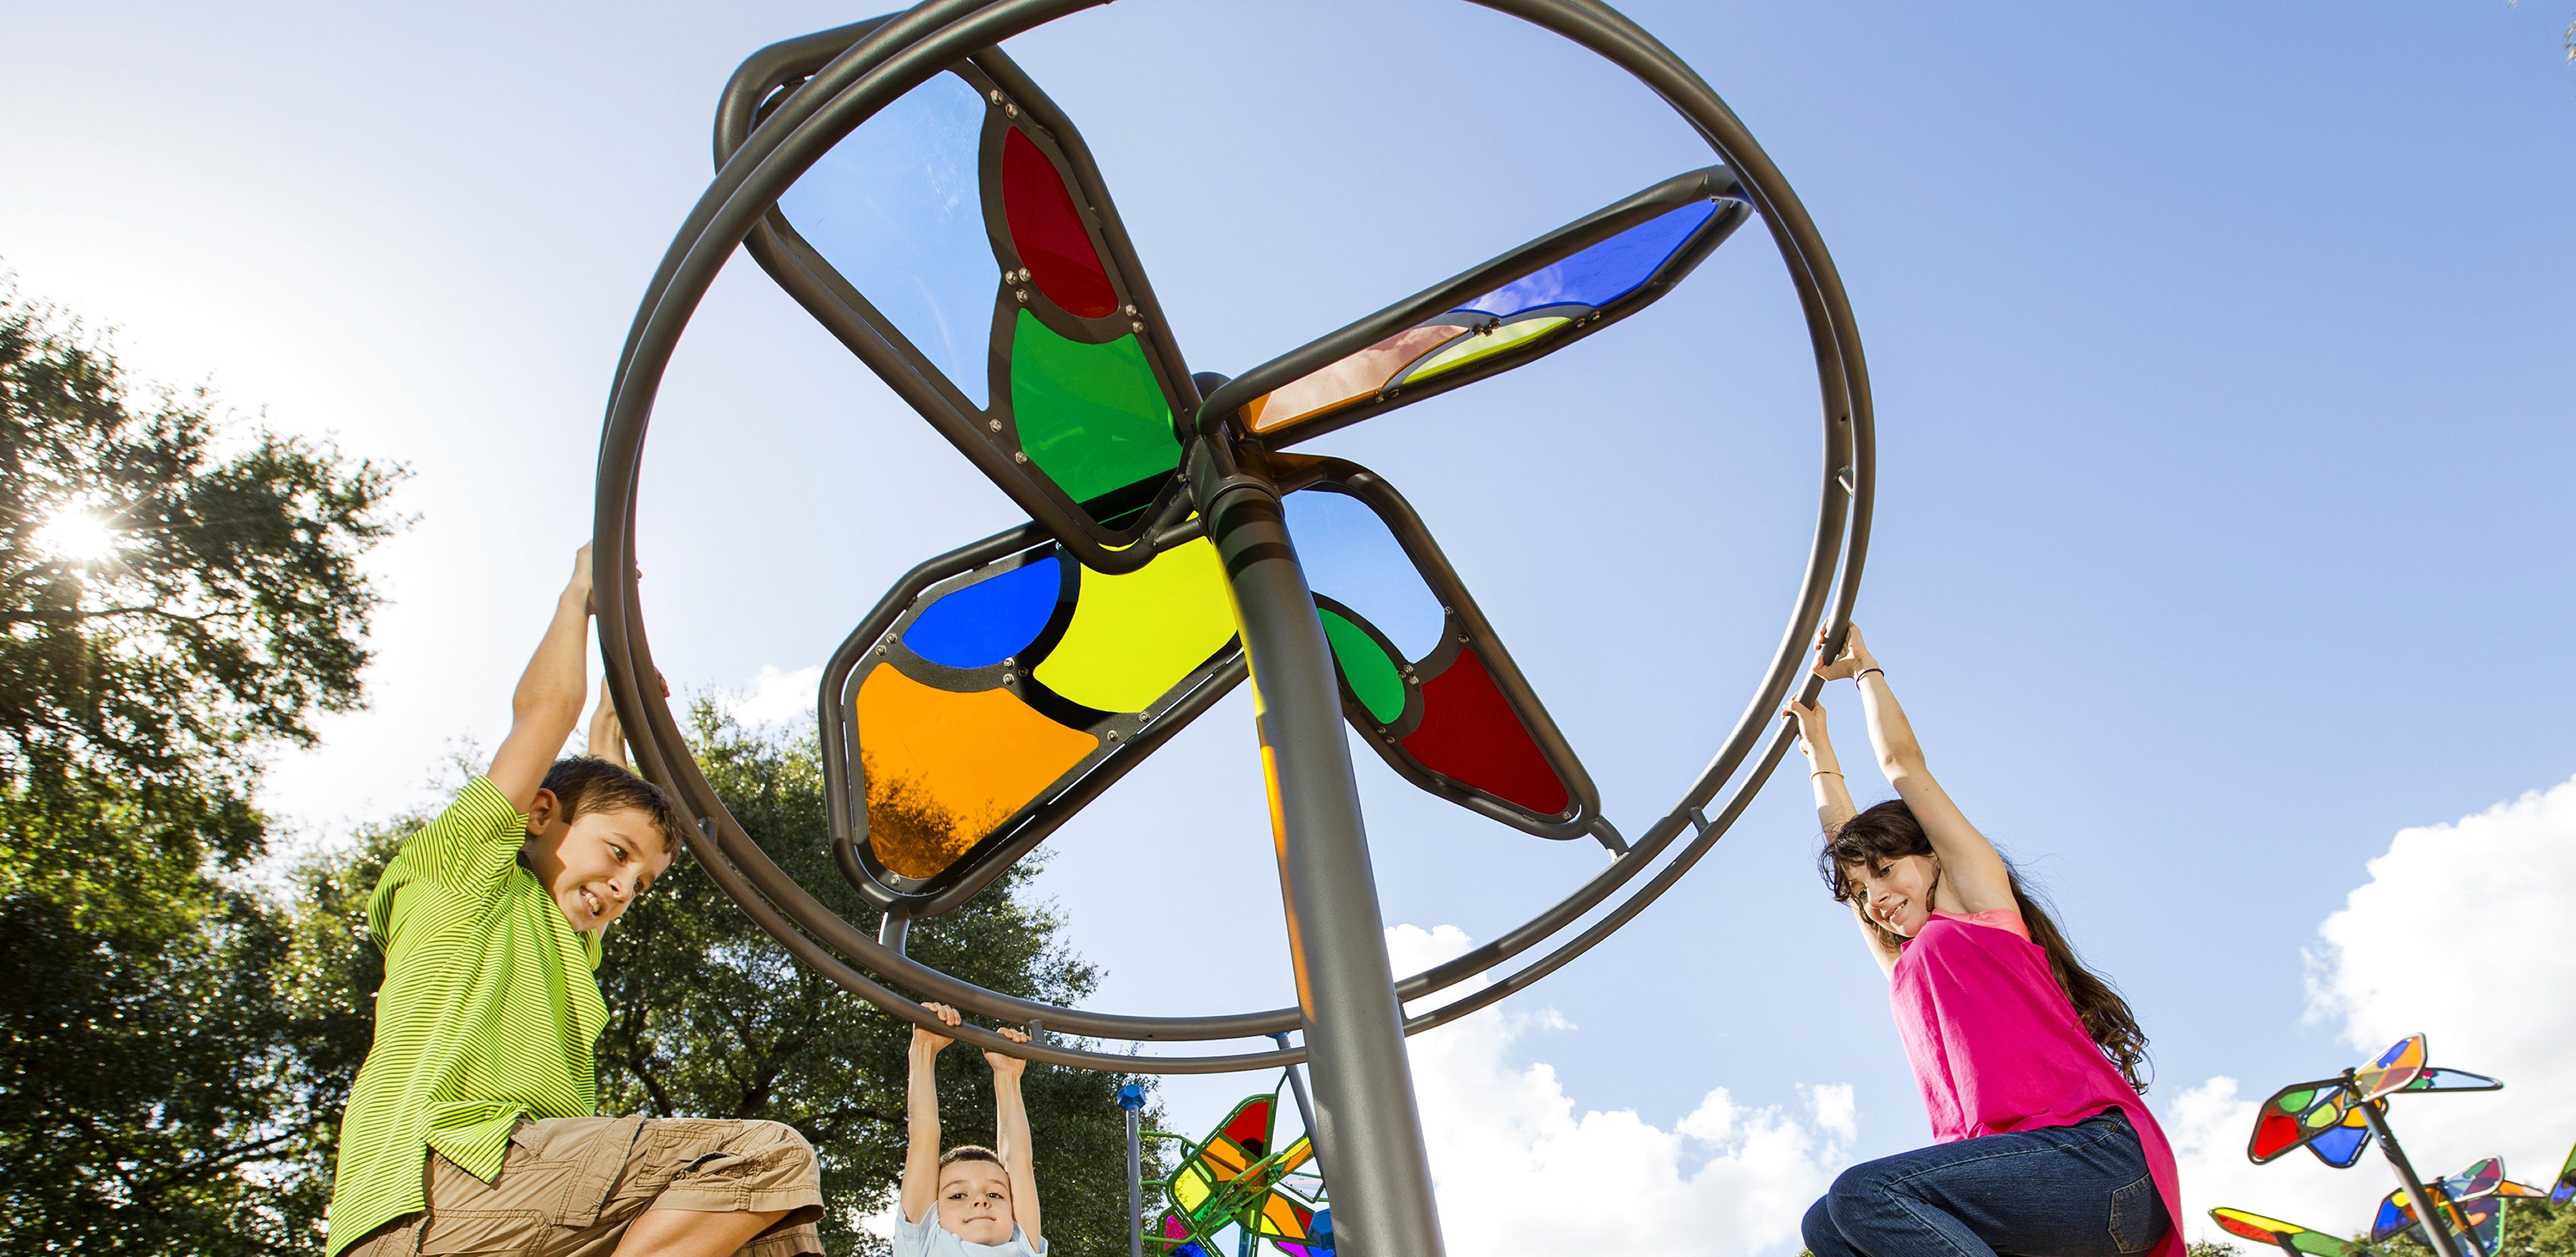 GameTime Breathes New Life into a Florida Park with Innovative Playground Equipment